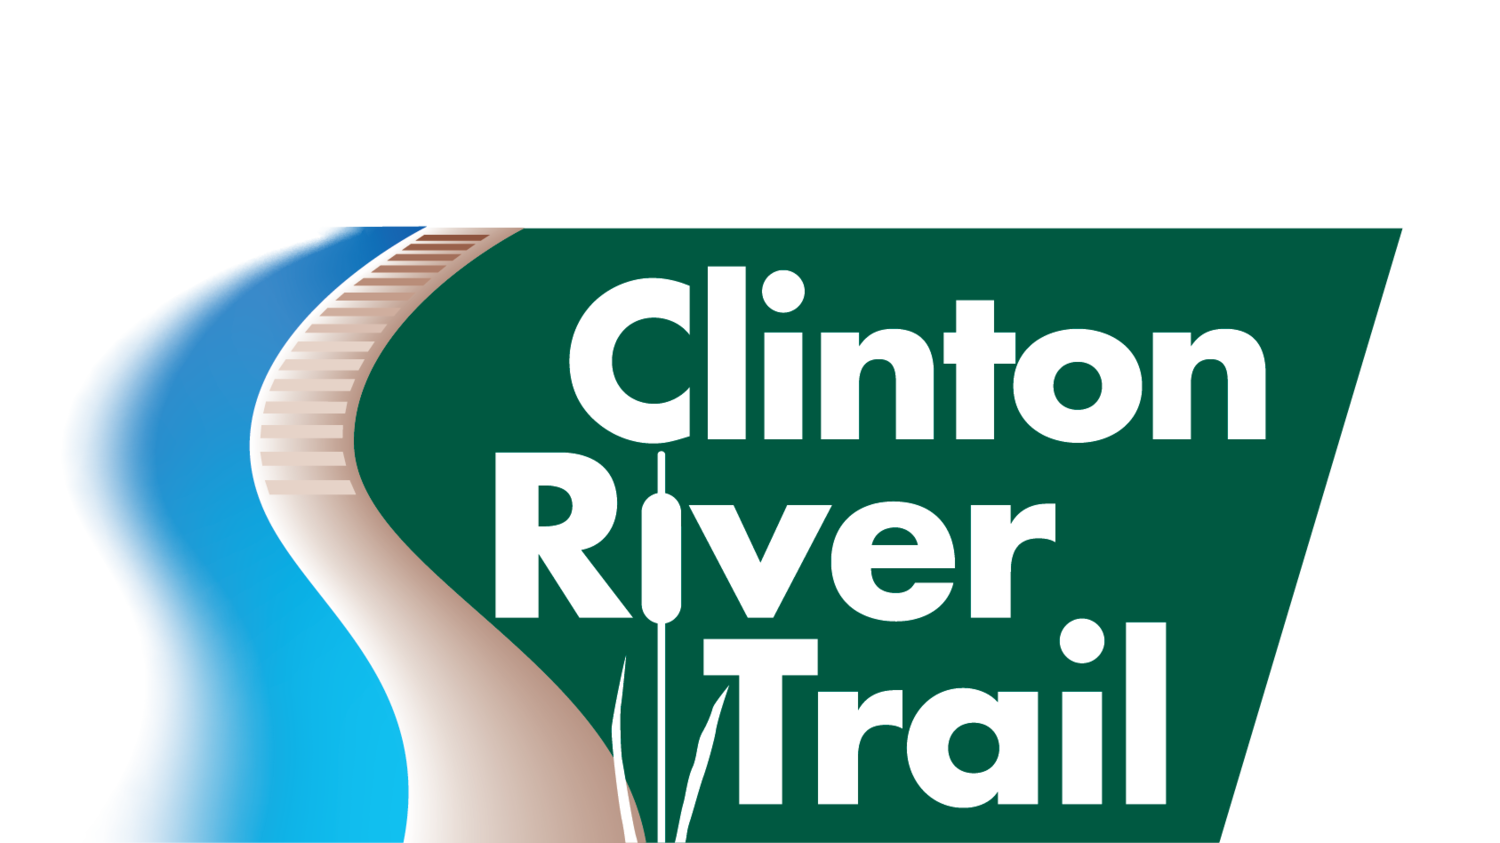 Friends of the Clinton River Trail